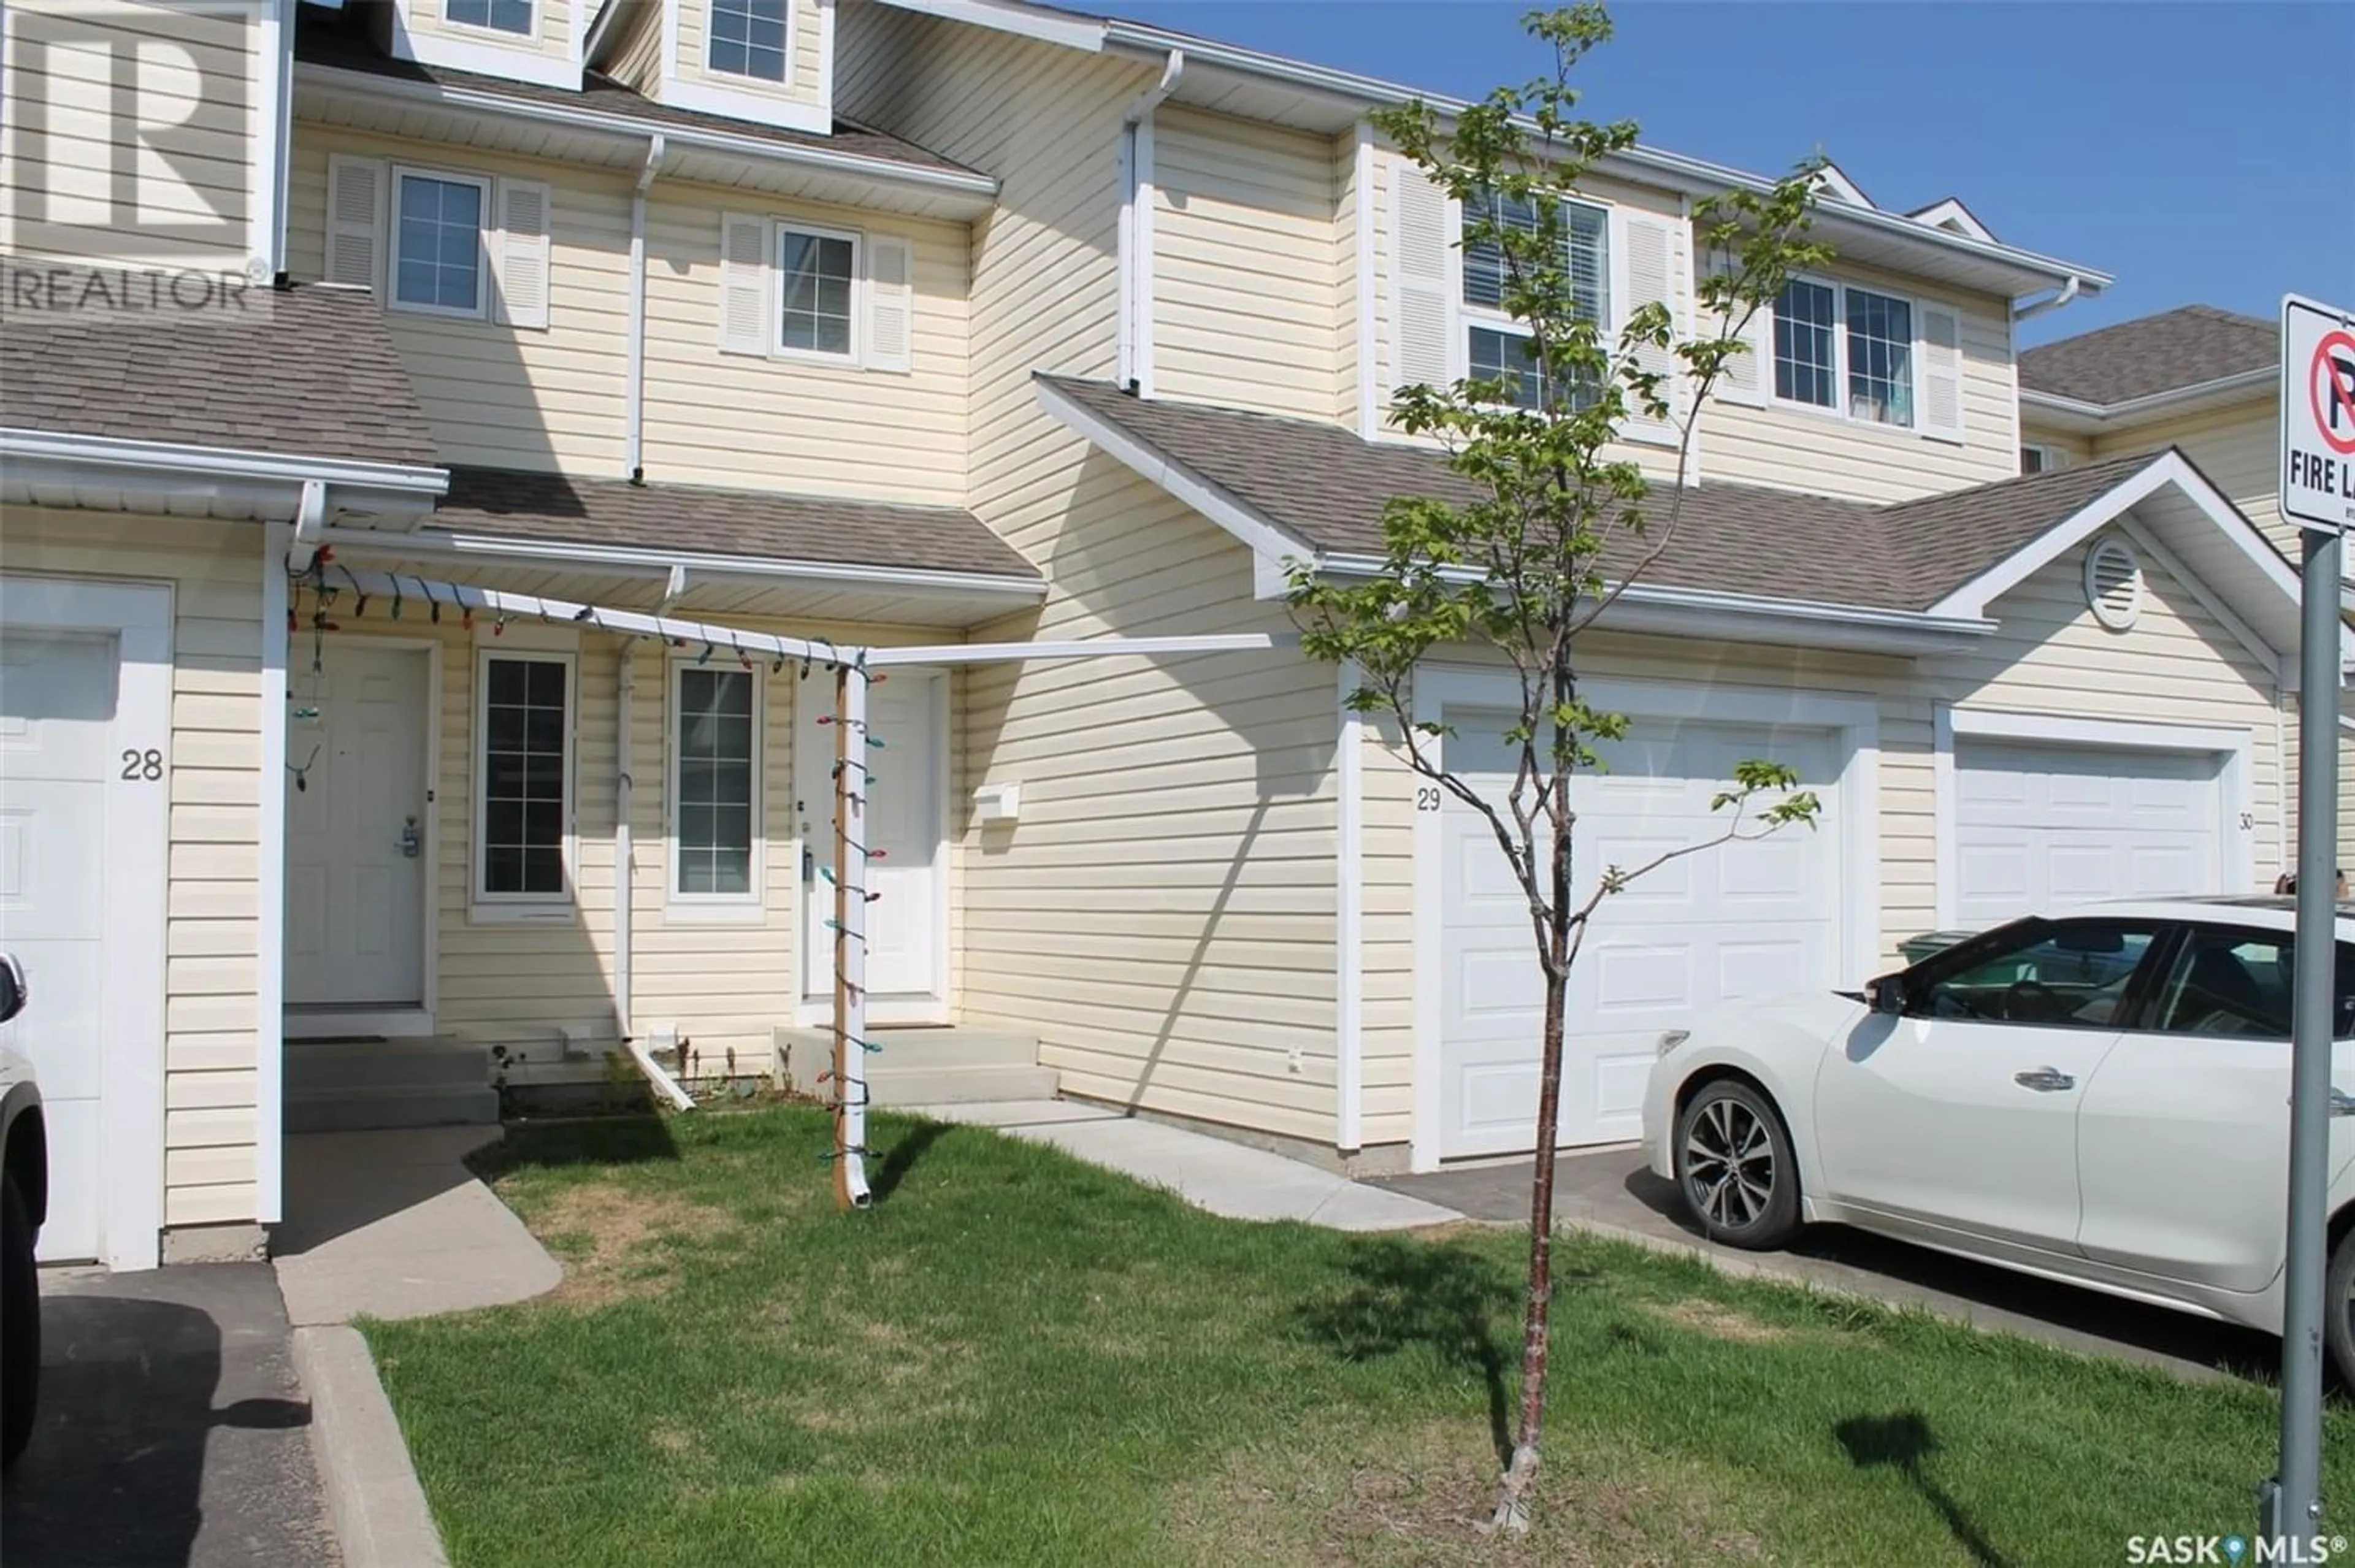 A pic from exterior of the house or condo for 29 207 KEEVIL WAY, Saskatoon Saskatchewan S7V0A8